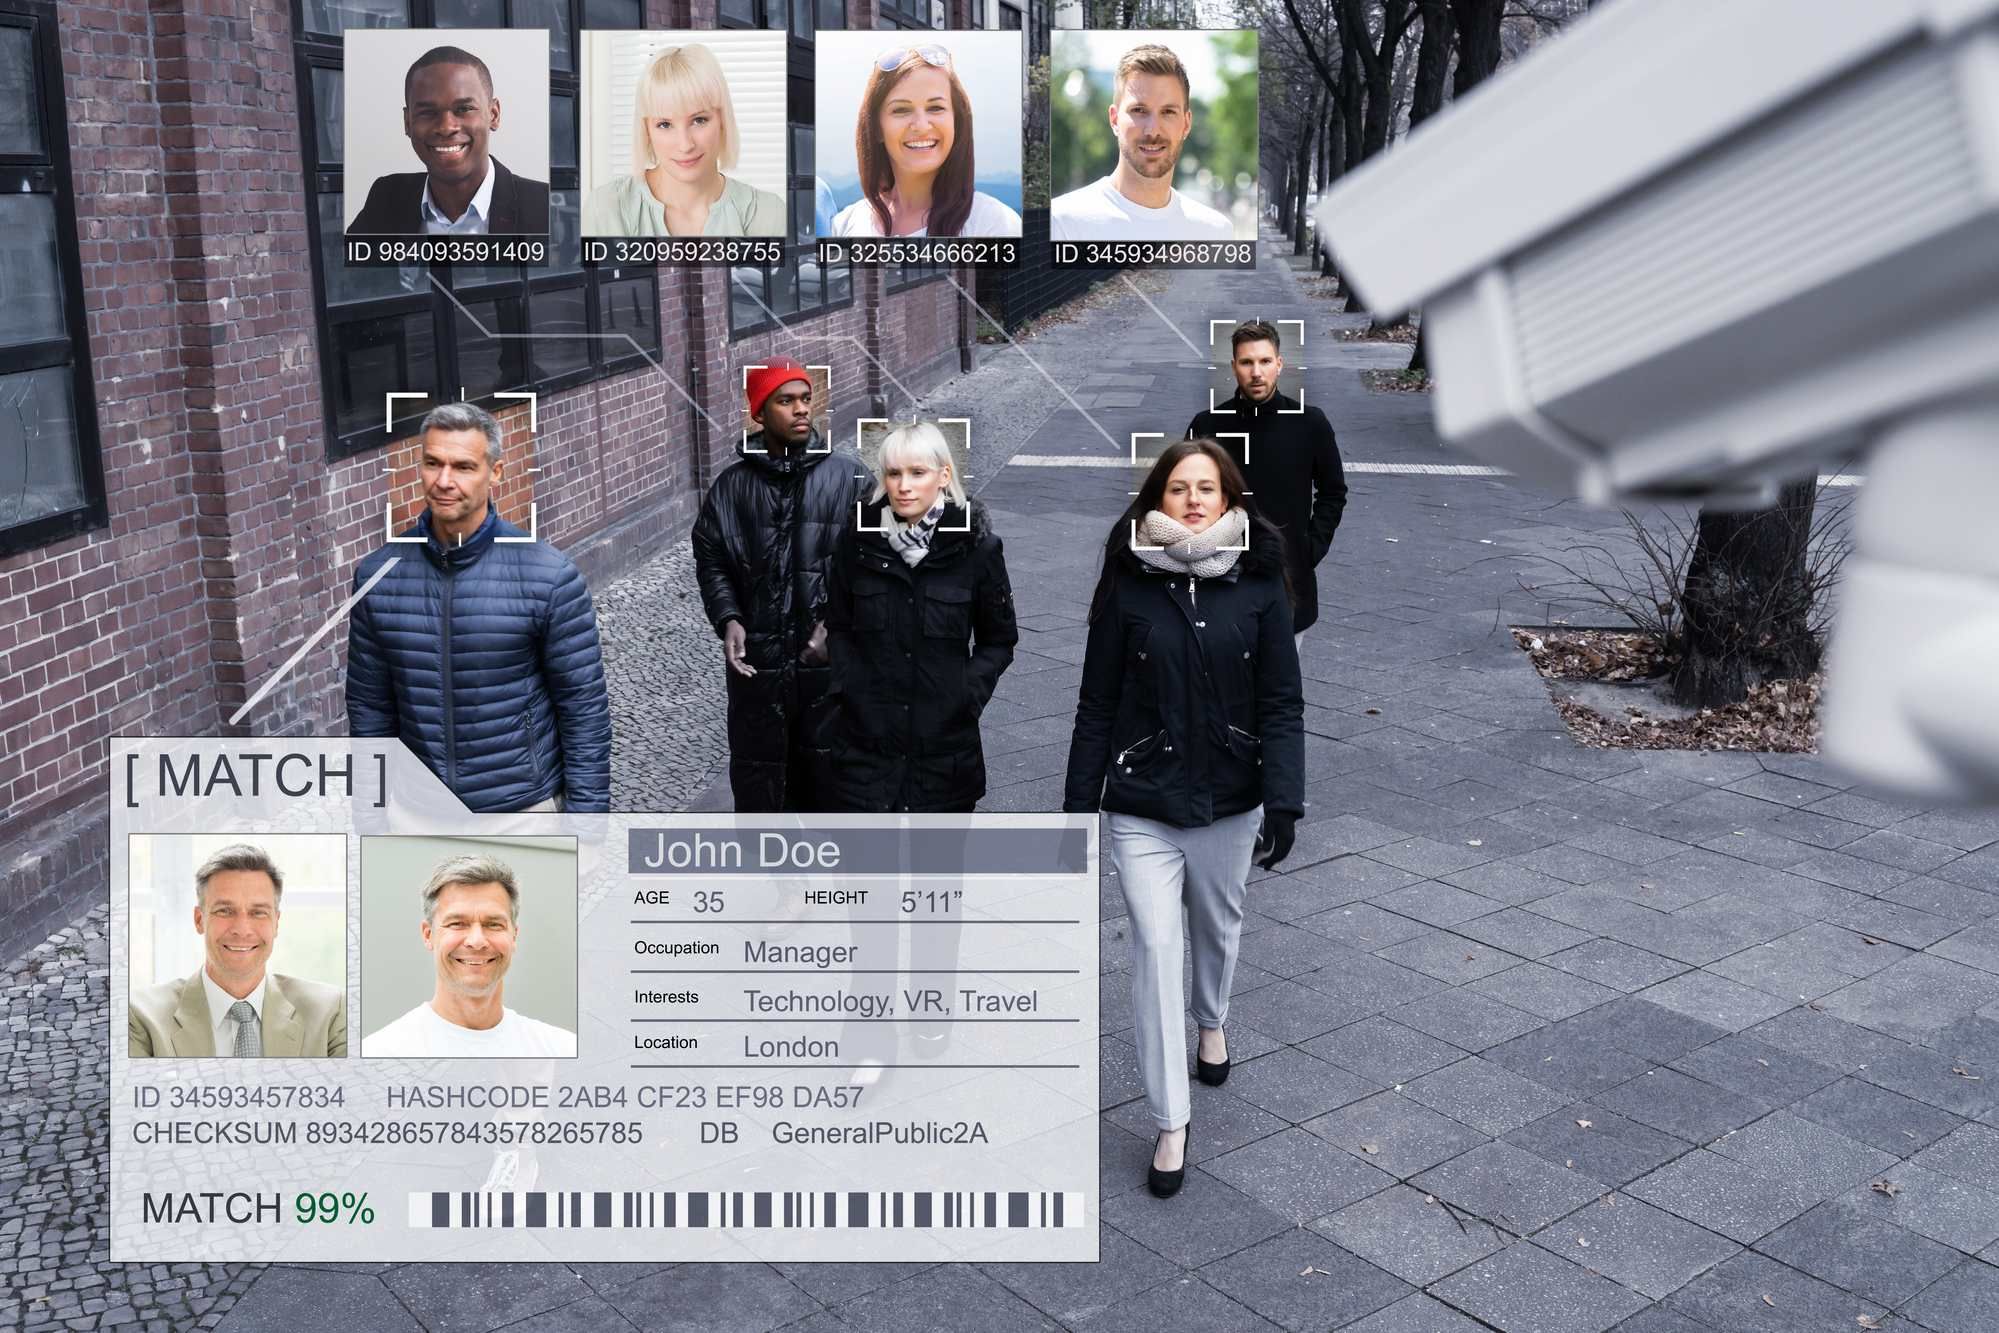 Facial recognition technology regarding the Clearview AI class action lawsuit filed